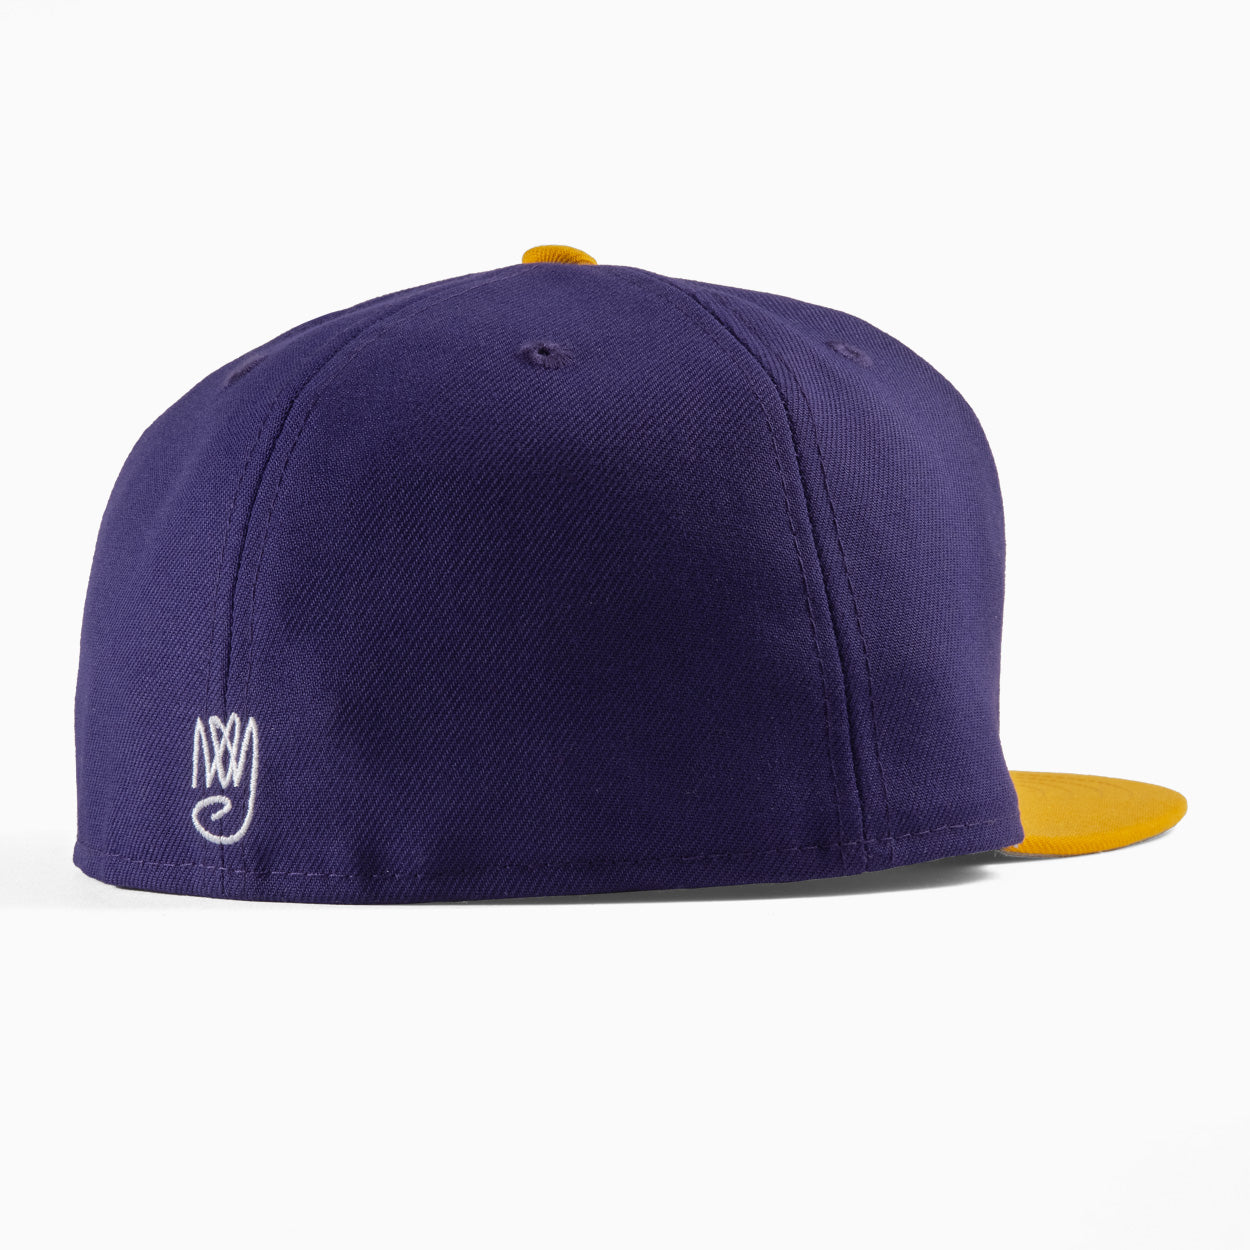 Showtime New Era Fitted